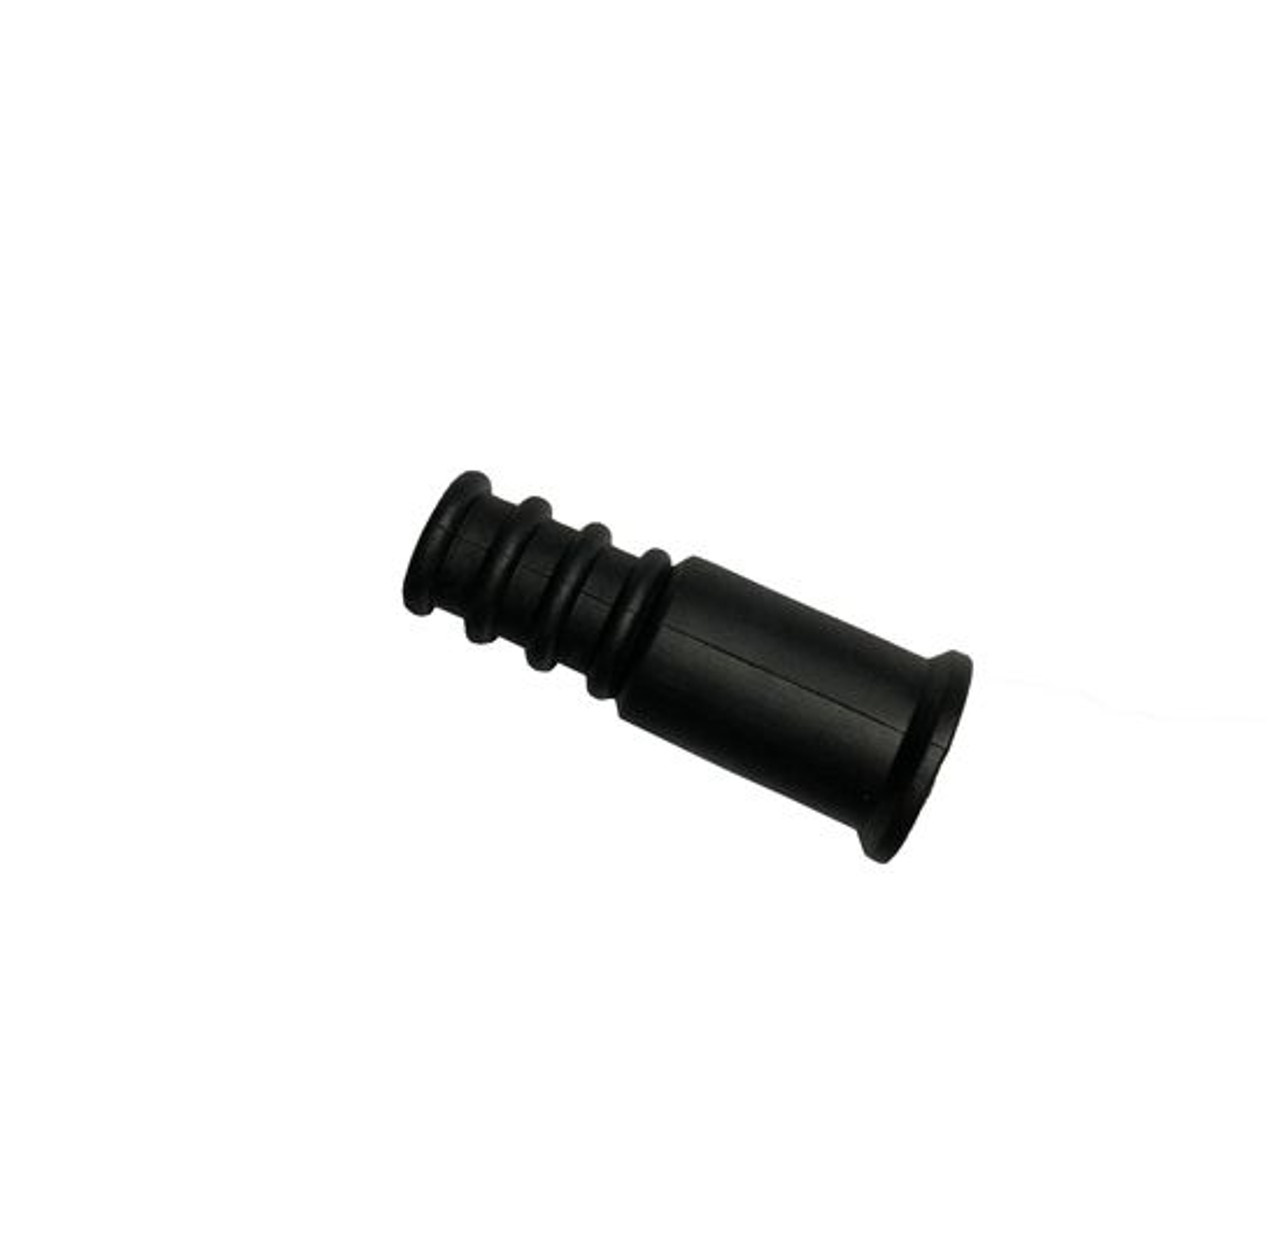 Vericom BRWBT-04551 F Conector Coaxial Weather Boot Sleeve 100 Pack Rubber RG45 RG6 Cover